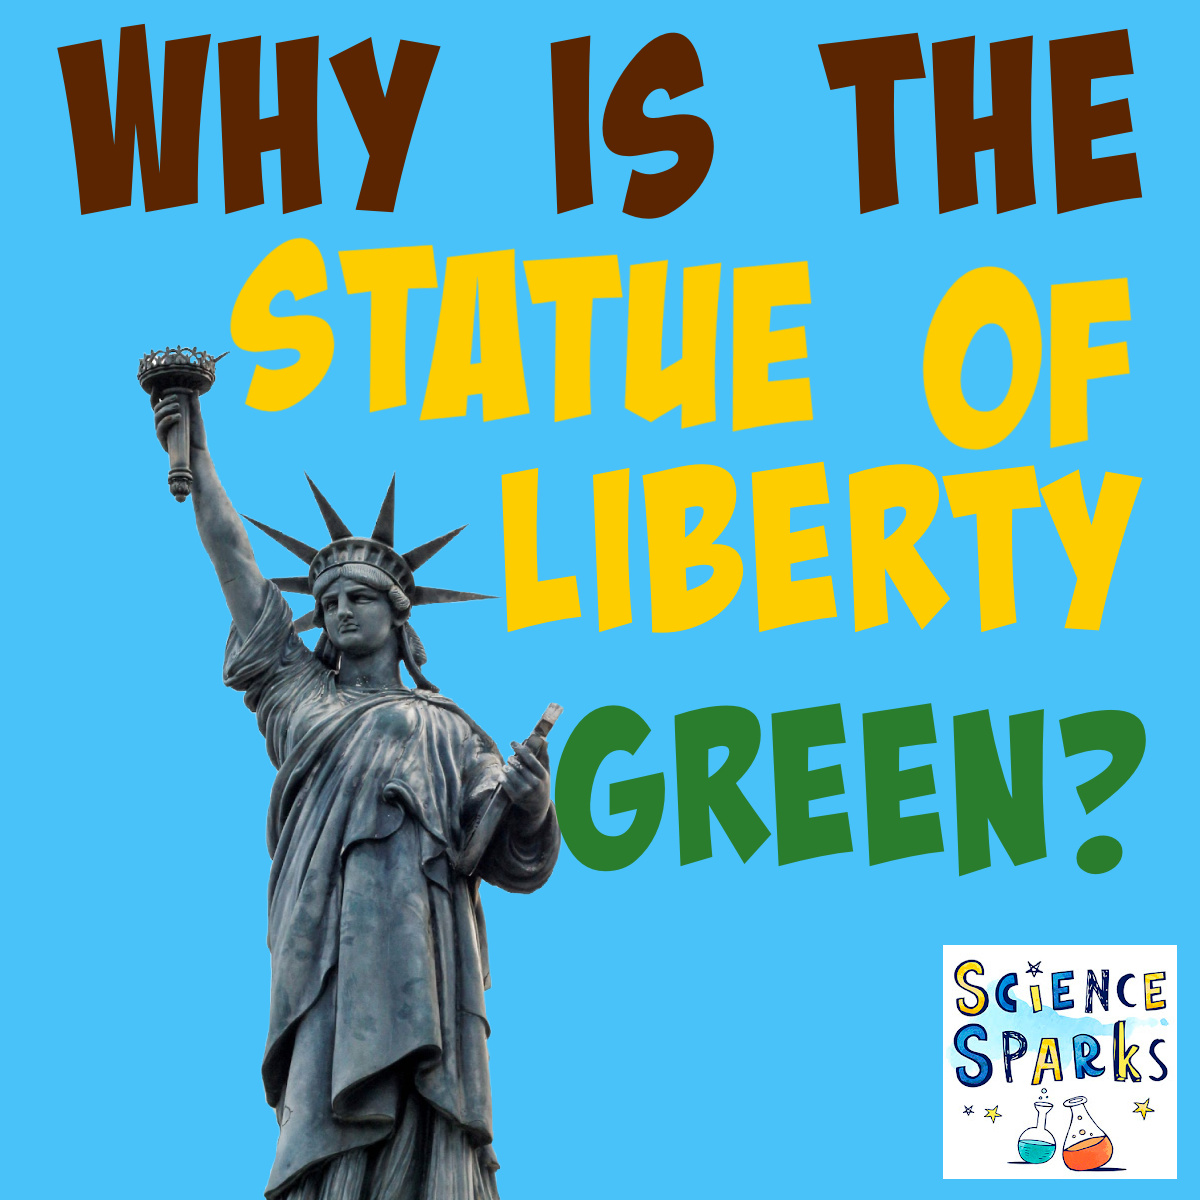 image of the Statue of Liberty